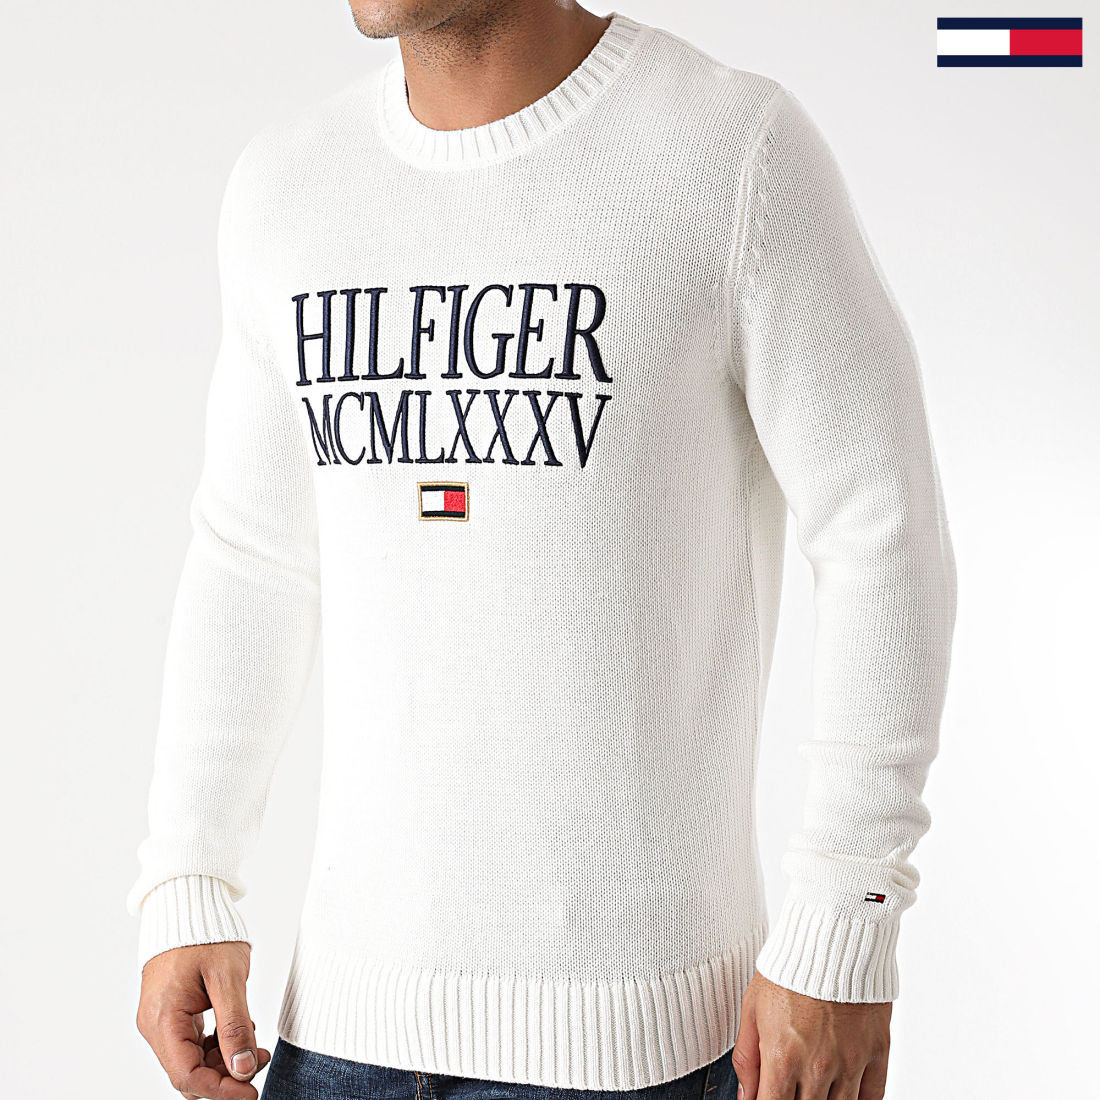 Pull-over Tommy Hilfiger Blanc taille M International en Coton - 40762145